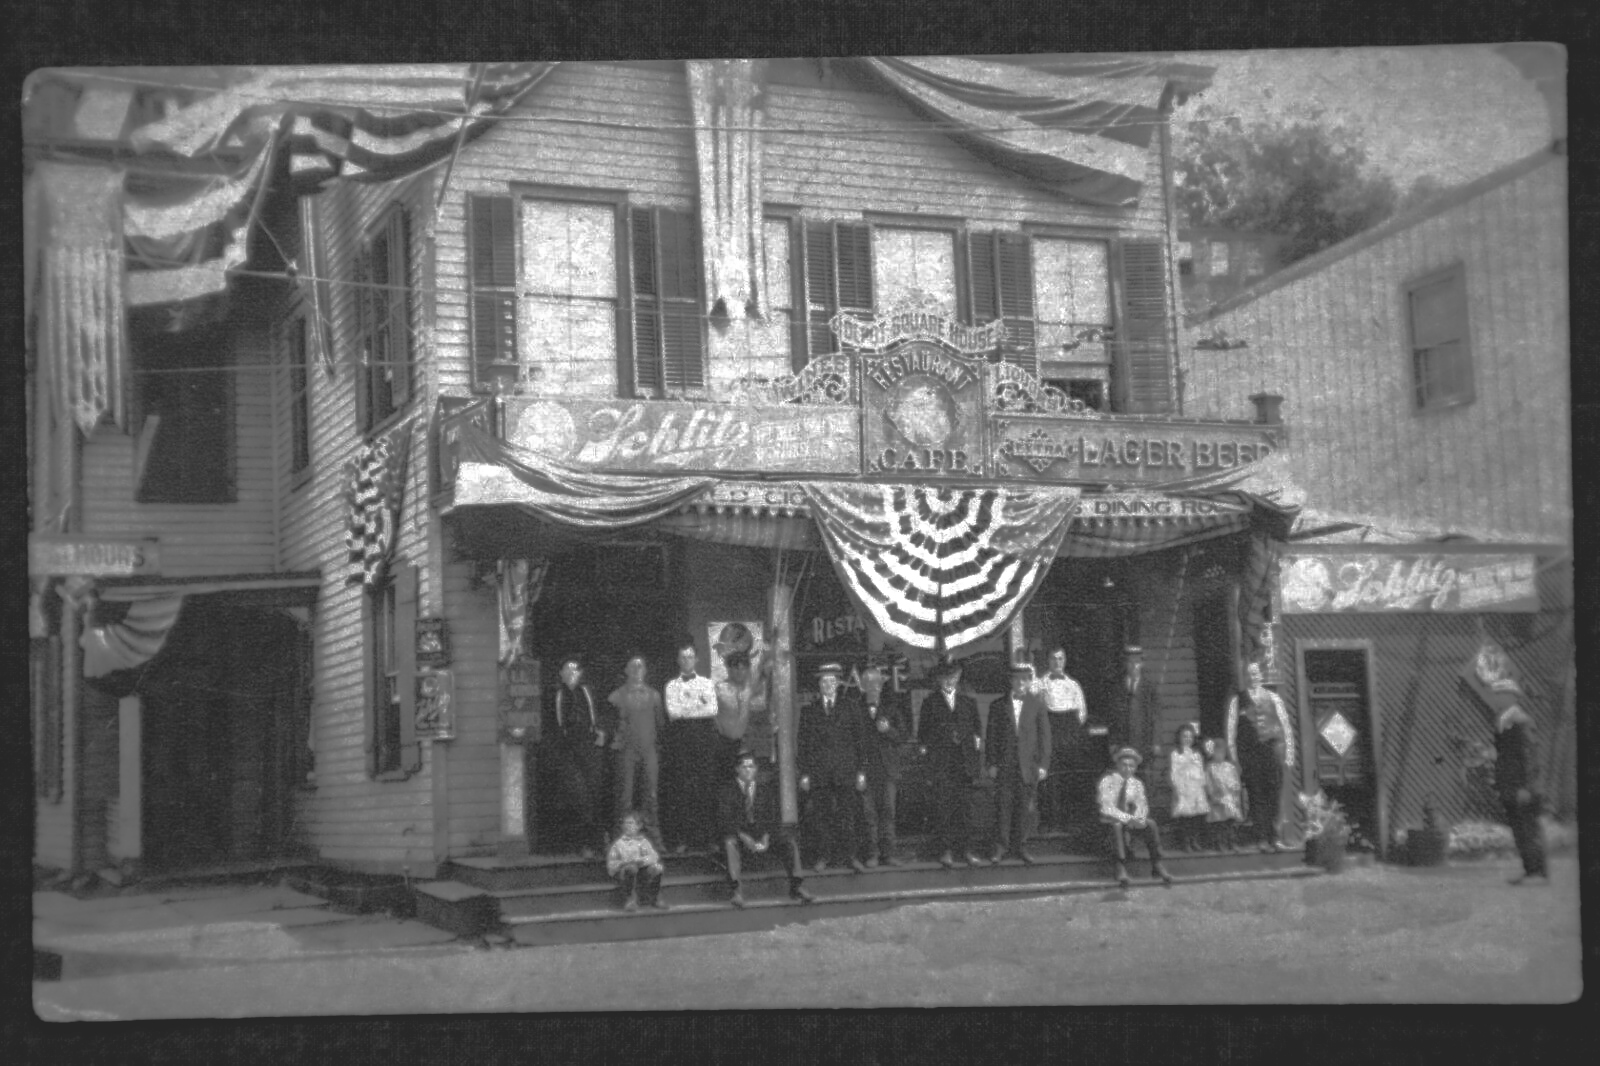 The Depot Square House & Restaurant In Ossining NY, Westchester County c1904